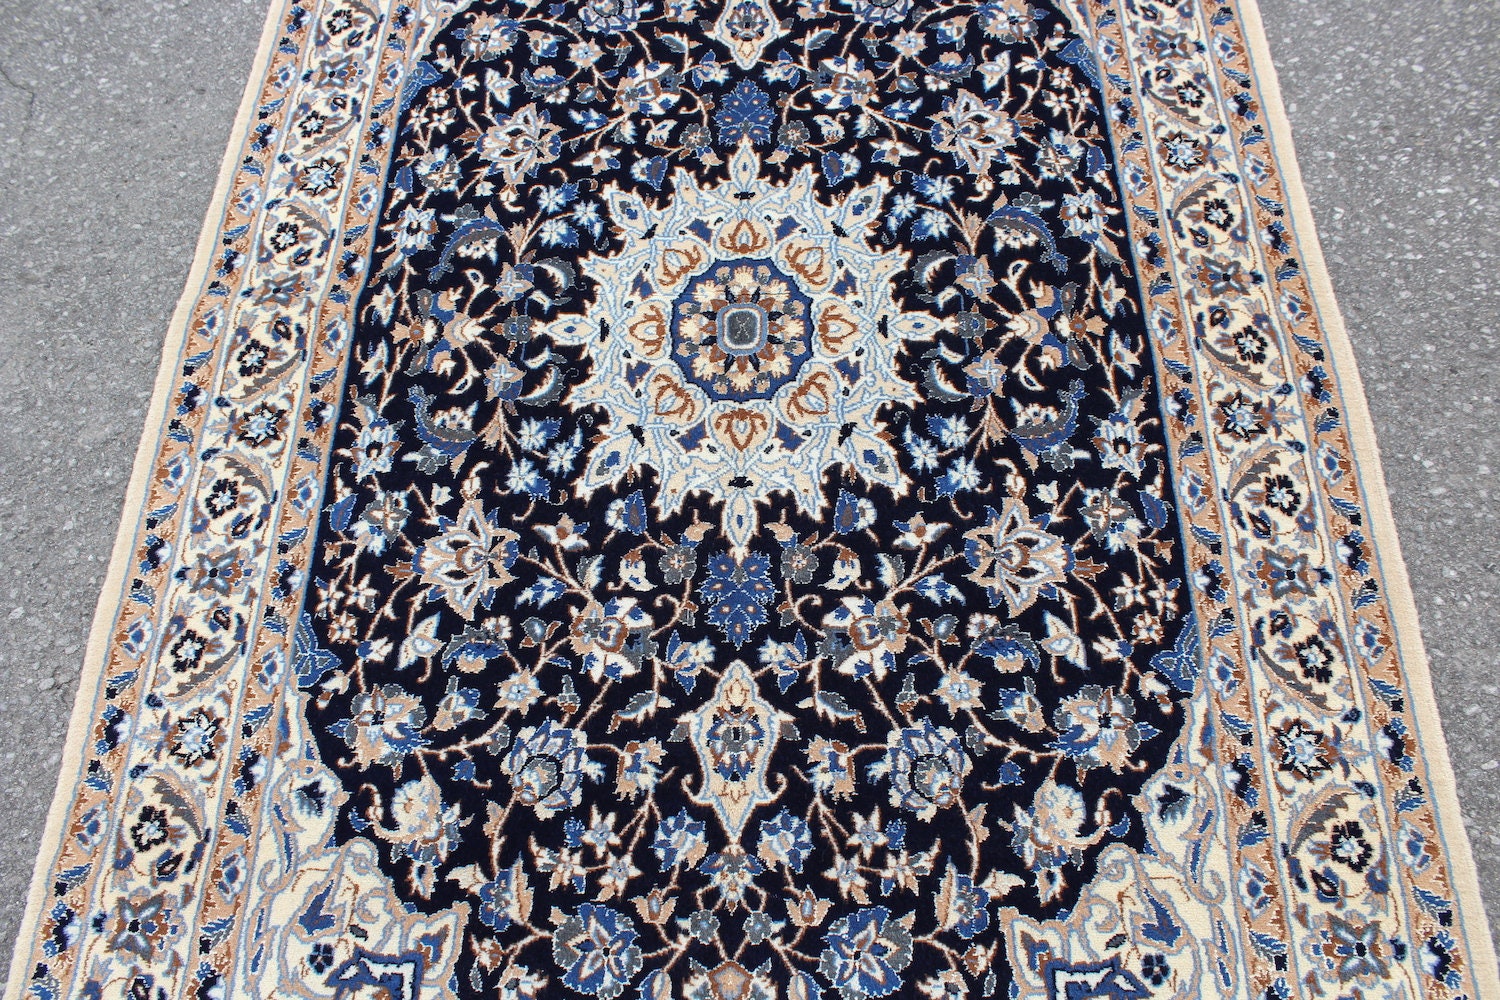 Antique Persian Blue 4x6 Medallion Rug | Traditional Oriental Design | Thick Wool Pile With Blue and Beige Details | Hand Knotted